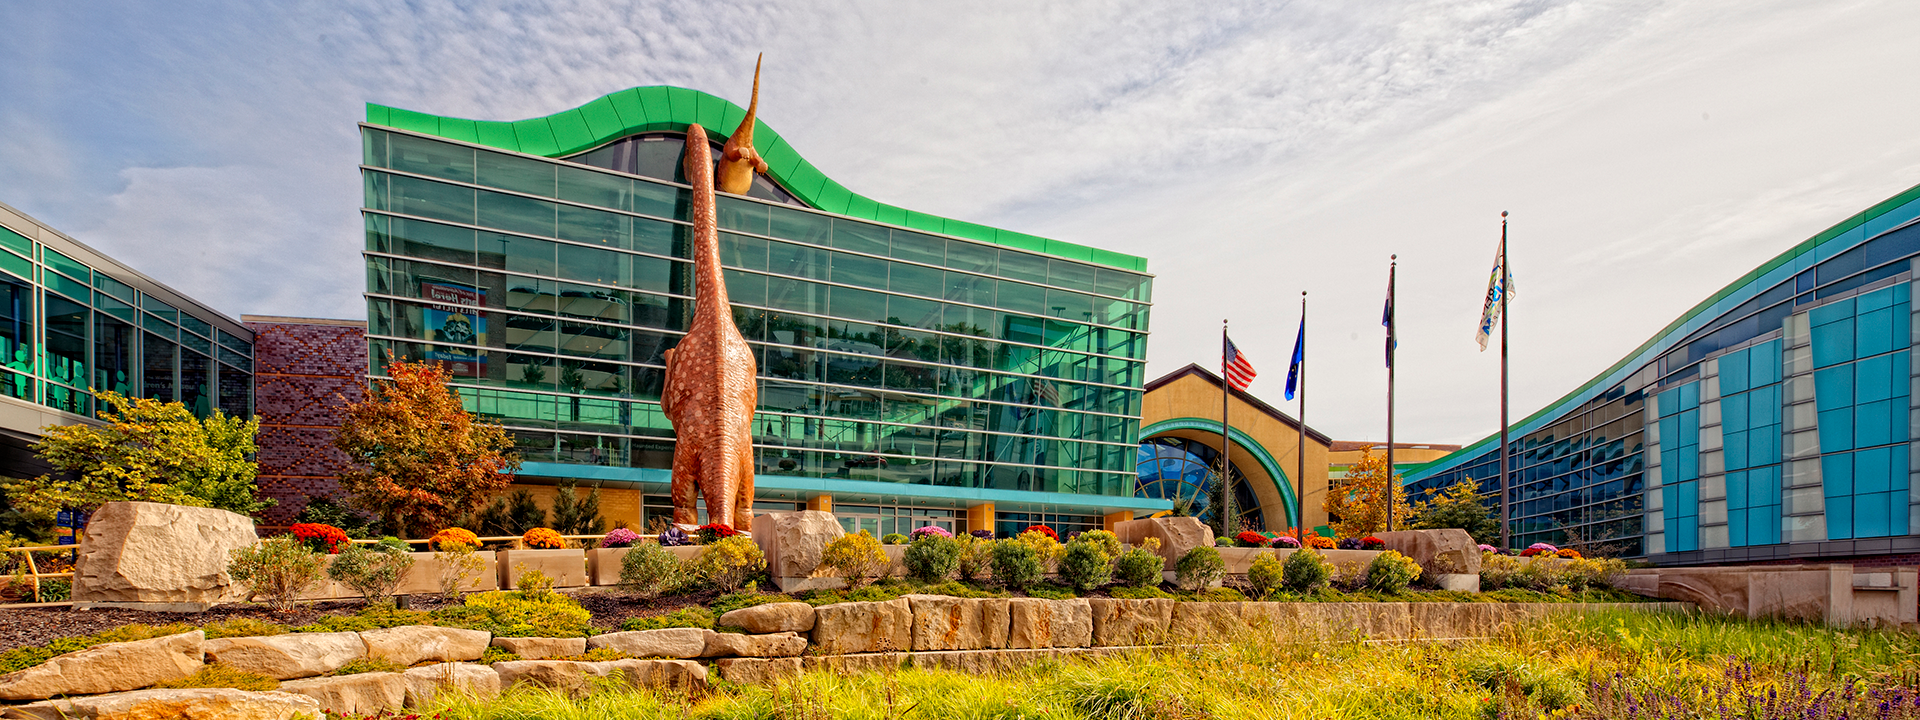 Exterior of The Children's Museum showing a dinosaur peeking into the building.